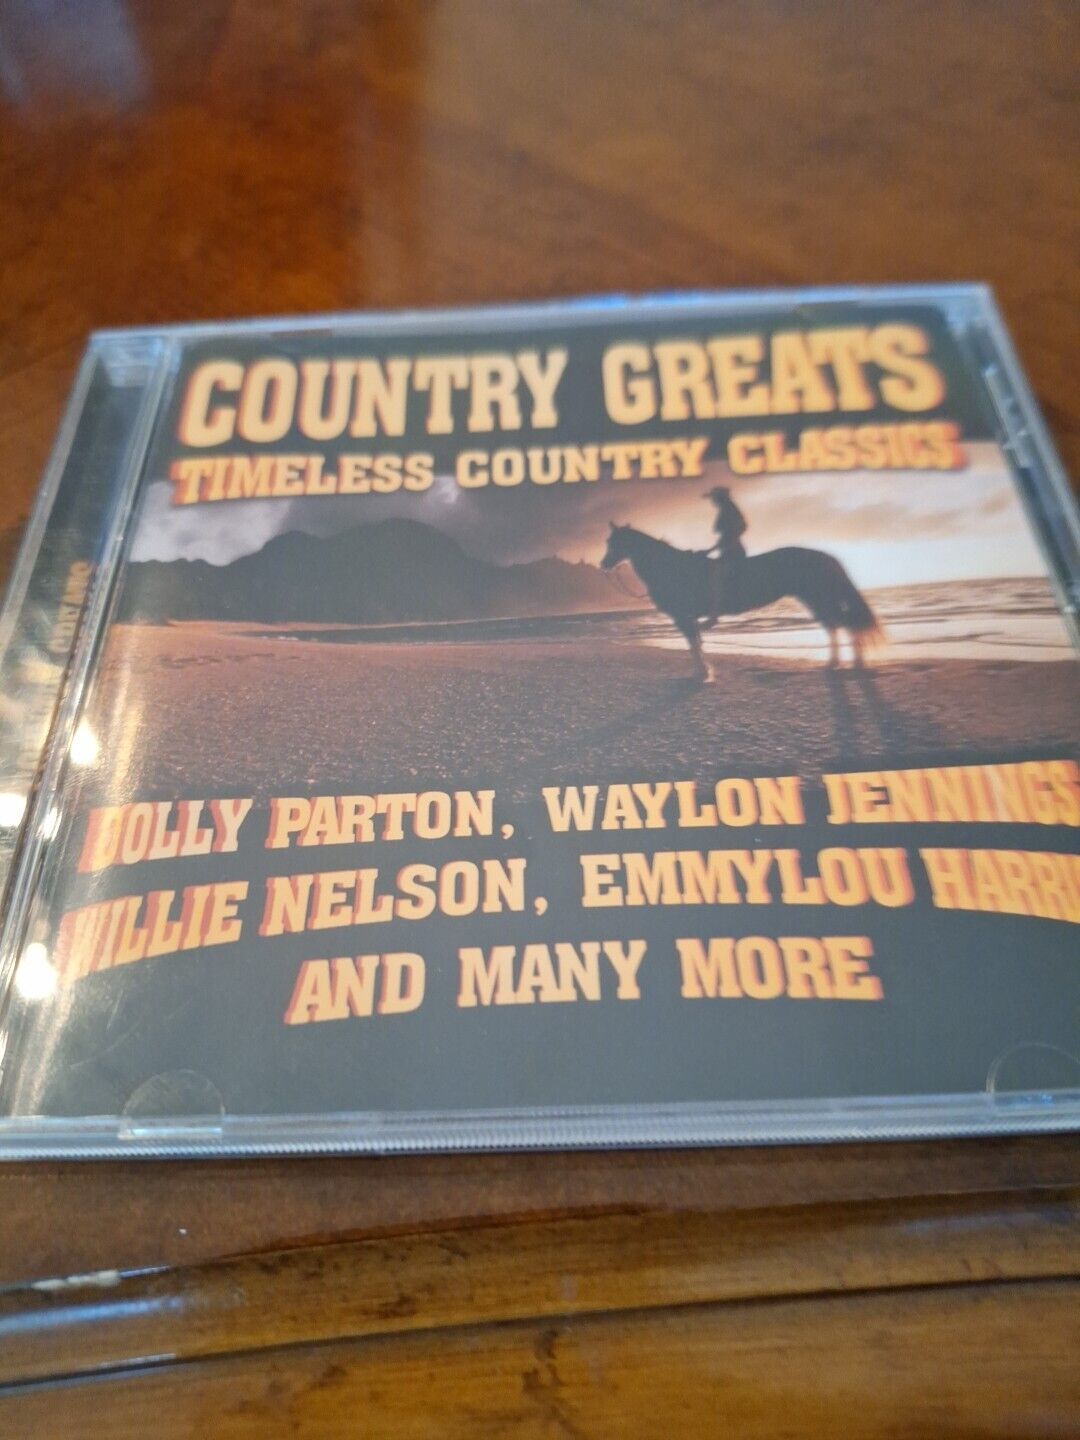 COUNTRY GREATS 20 Timeless Country Classics Audio CD - Ships Fast Same Day